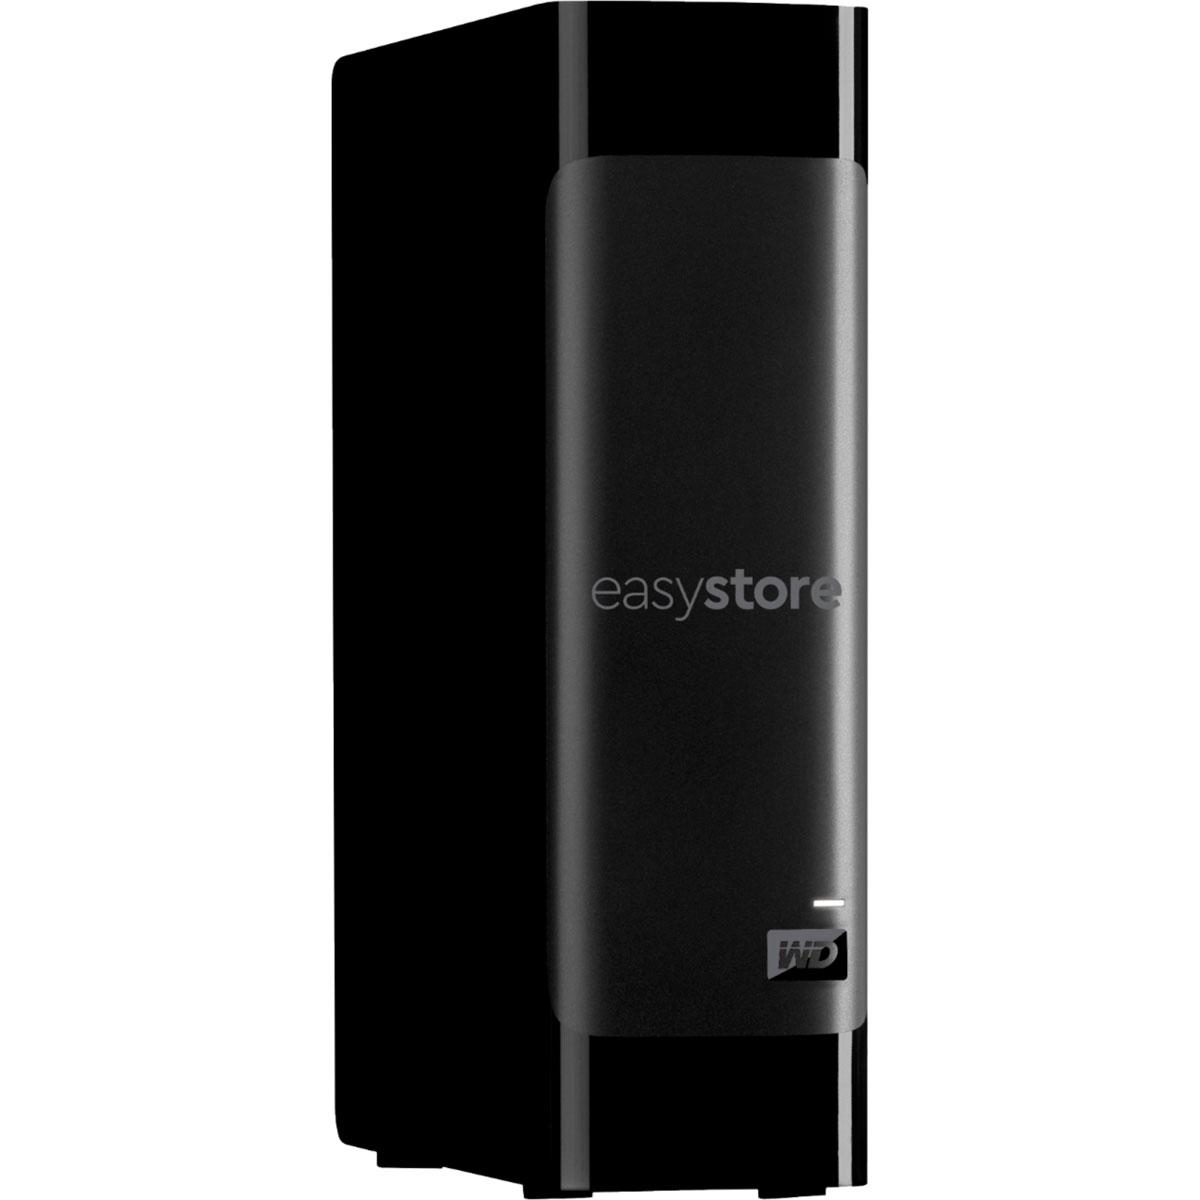 WD easystore 8TB External USB 3.0 Hard Drive for $129.99 Shipped